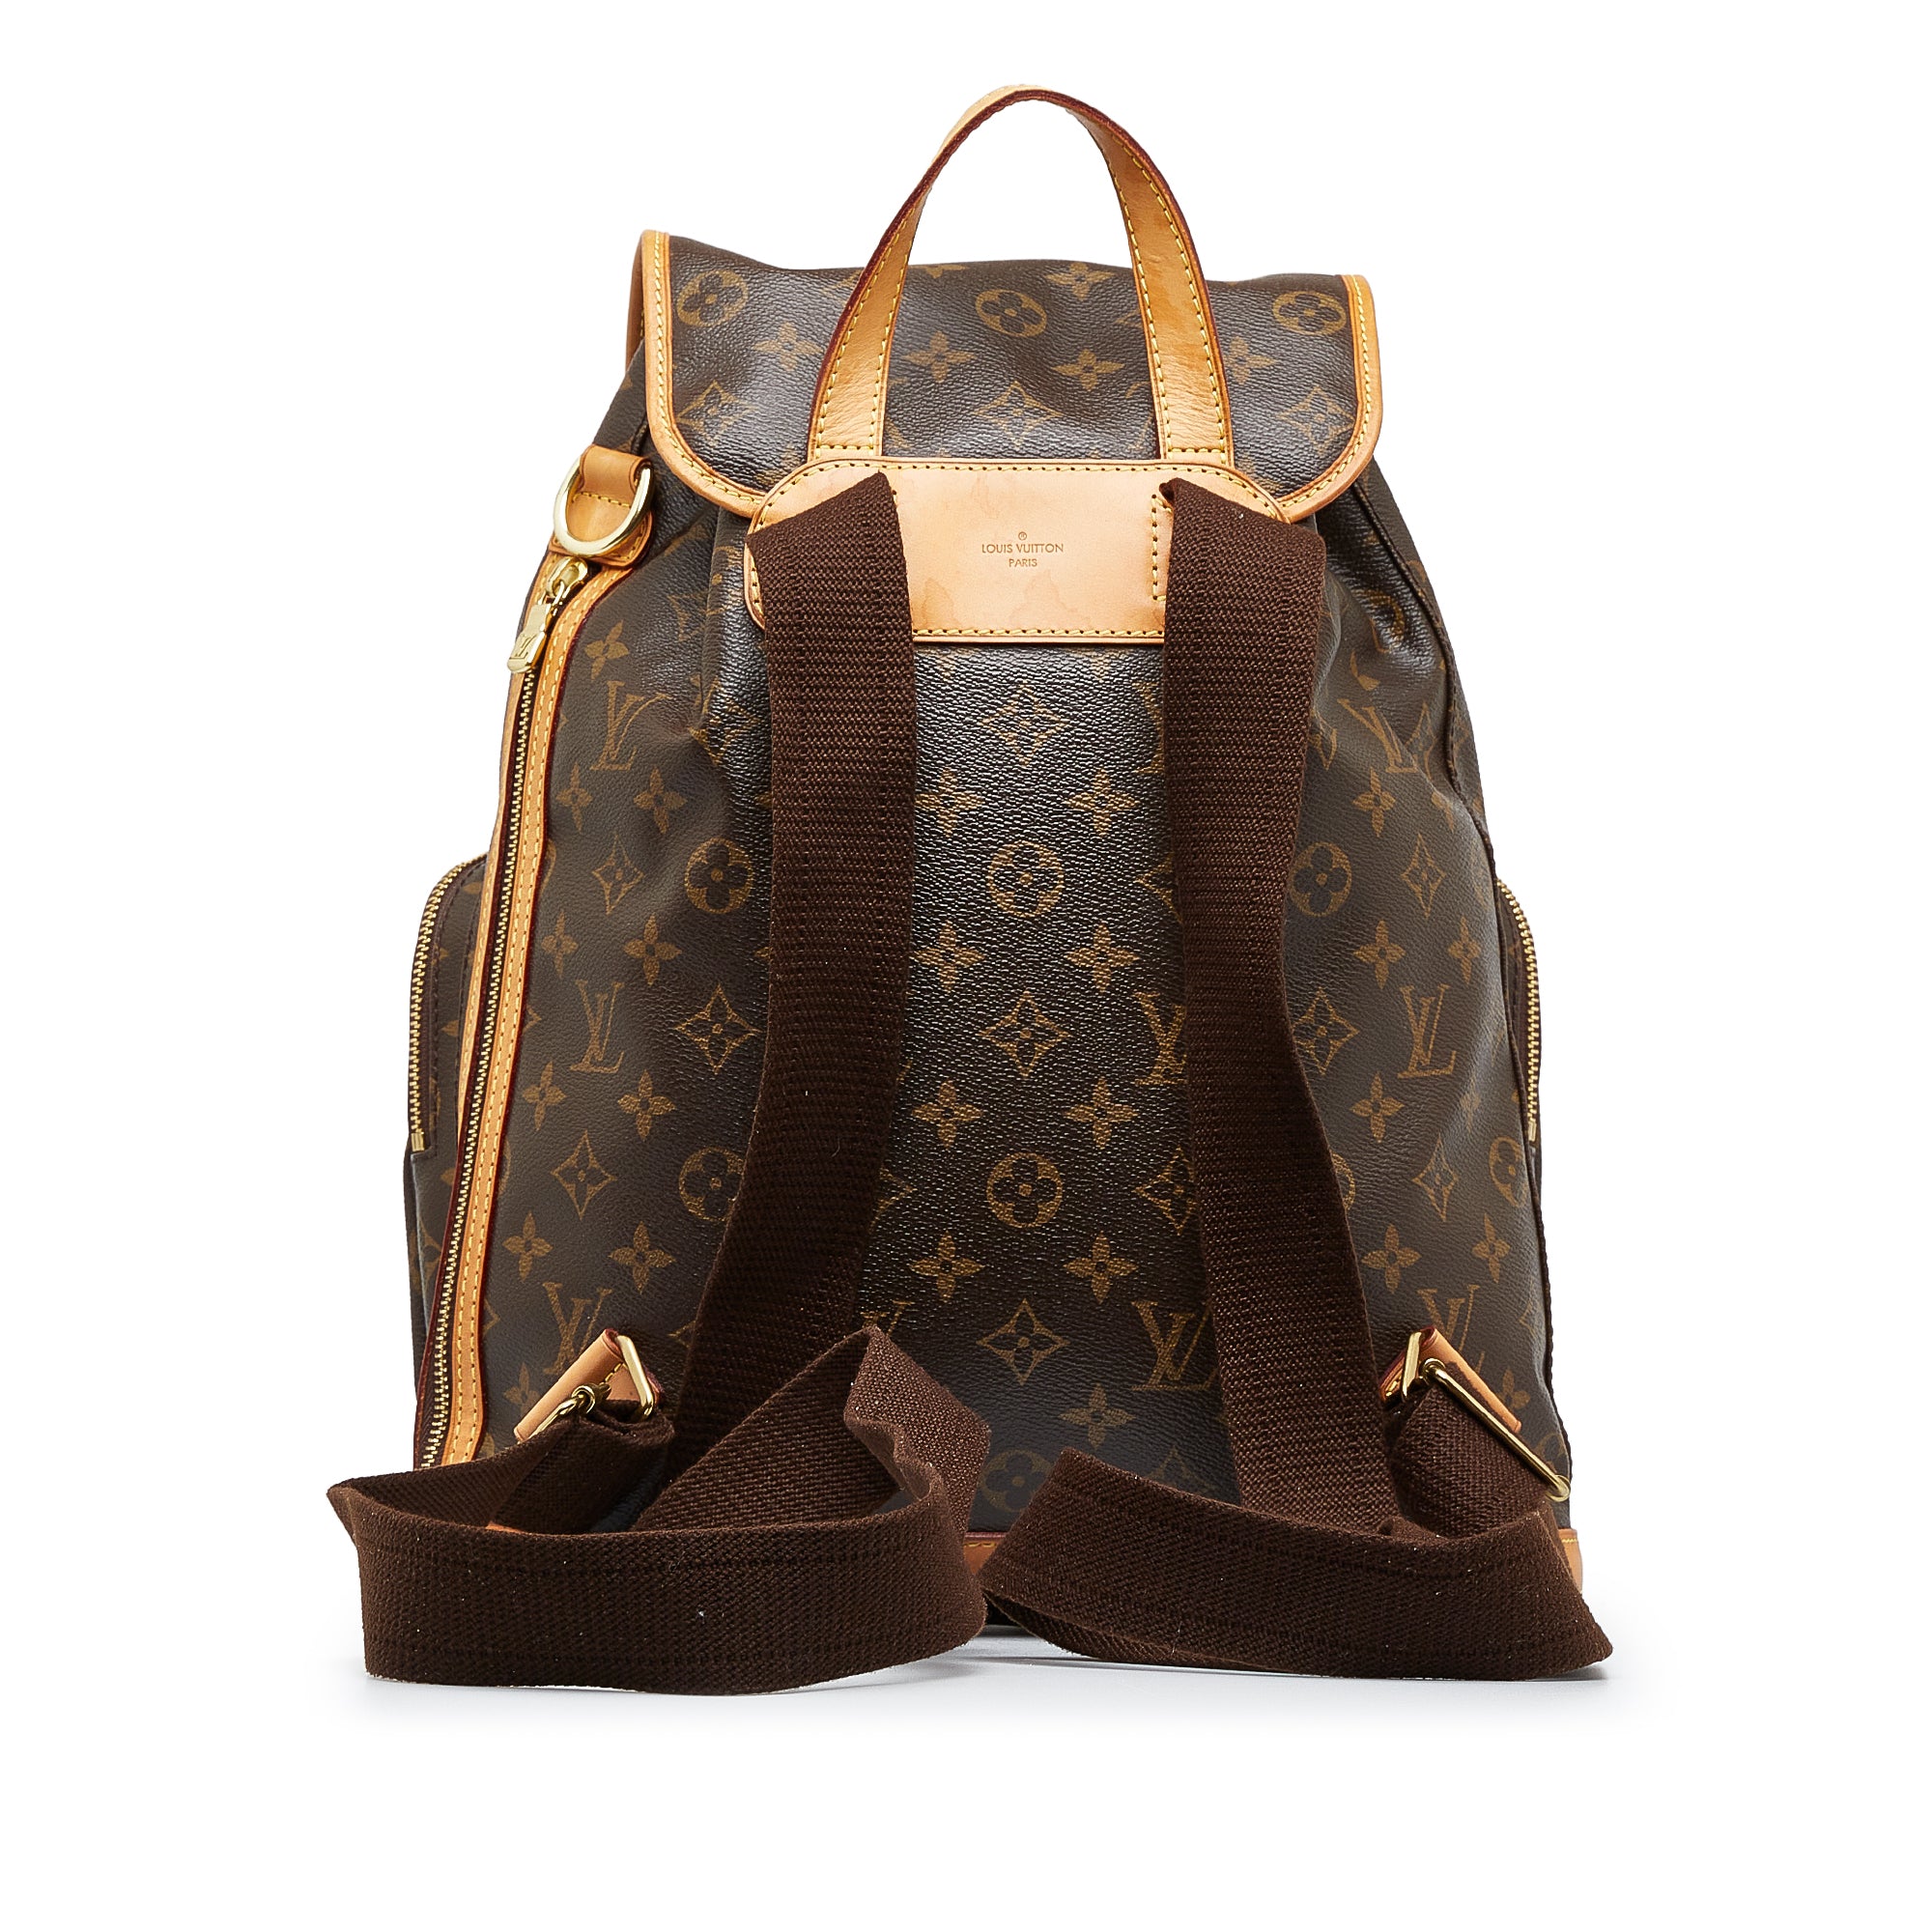 Pre-Owned Louis Vuitton Sac a Dos Bosphore Monogram Canvas Backpack